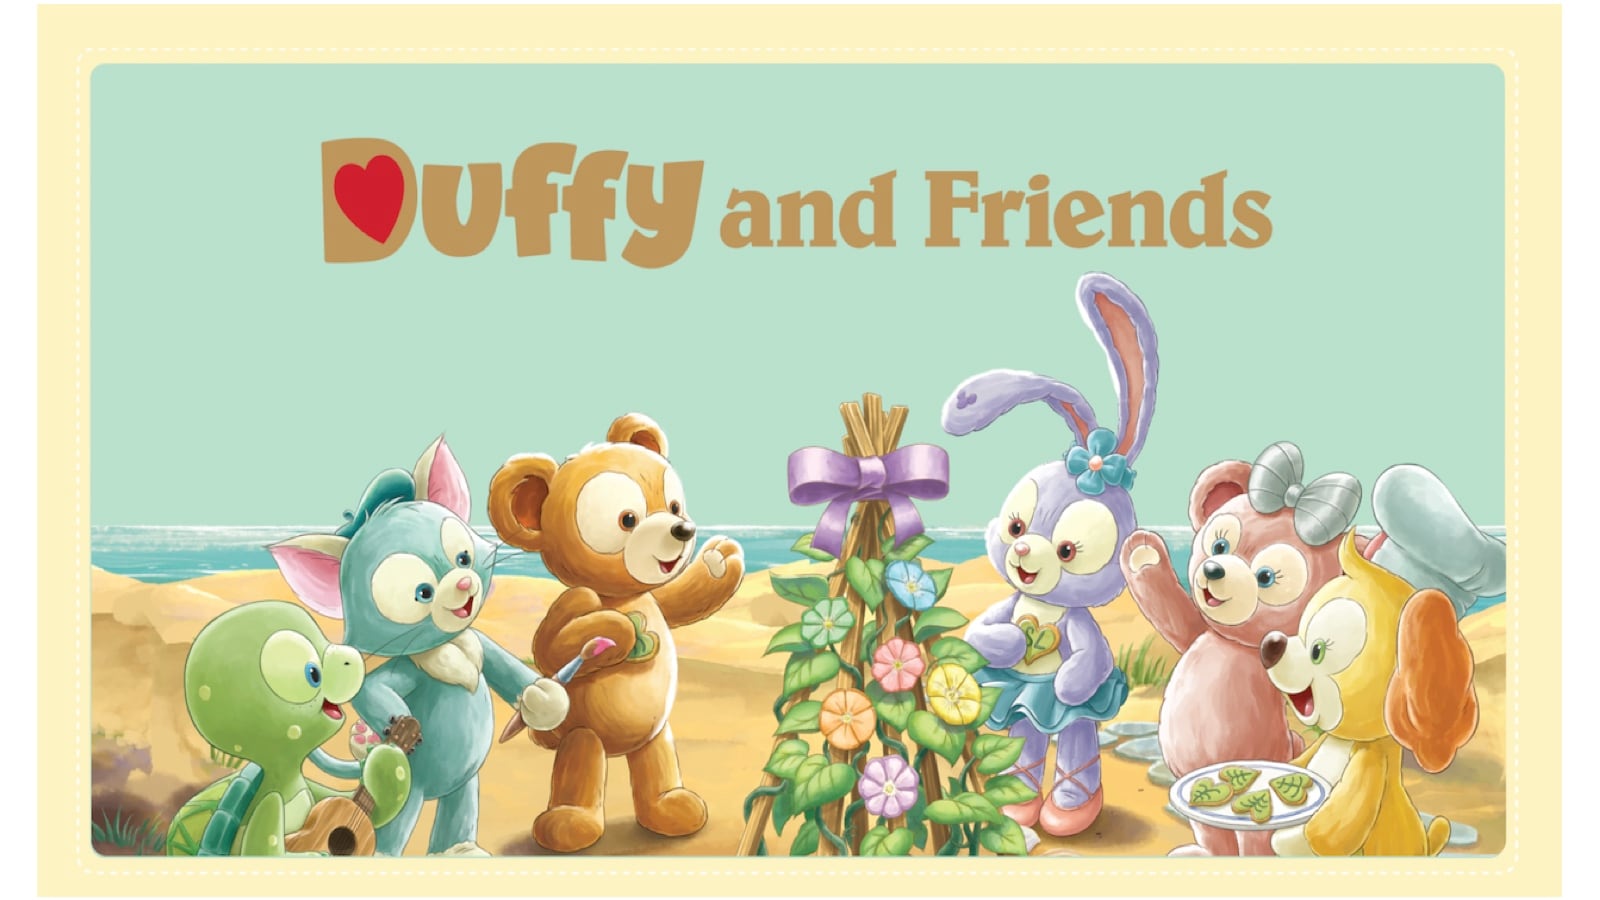 A Friendship-Filled Moment with Duffy & Friends Shared Around the World | Disney Parks